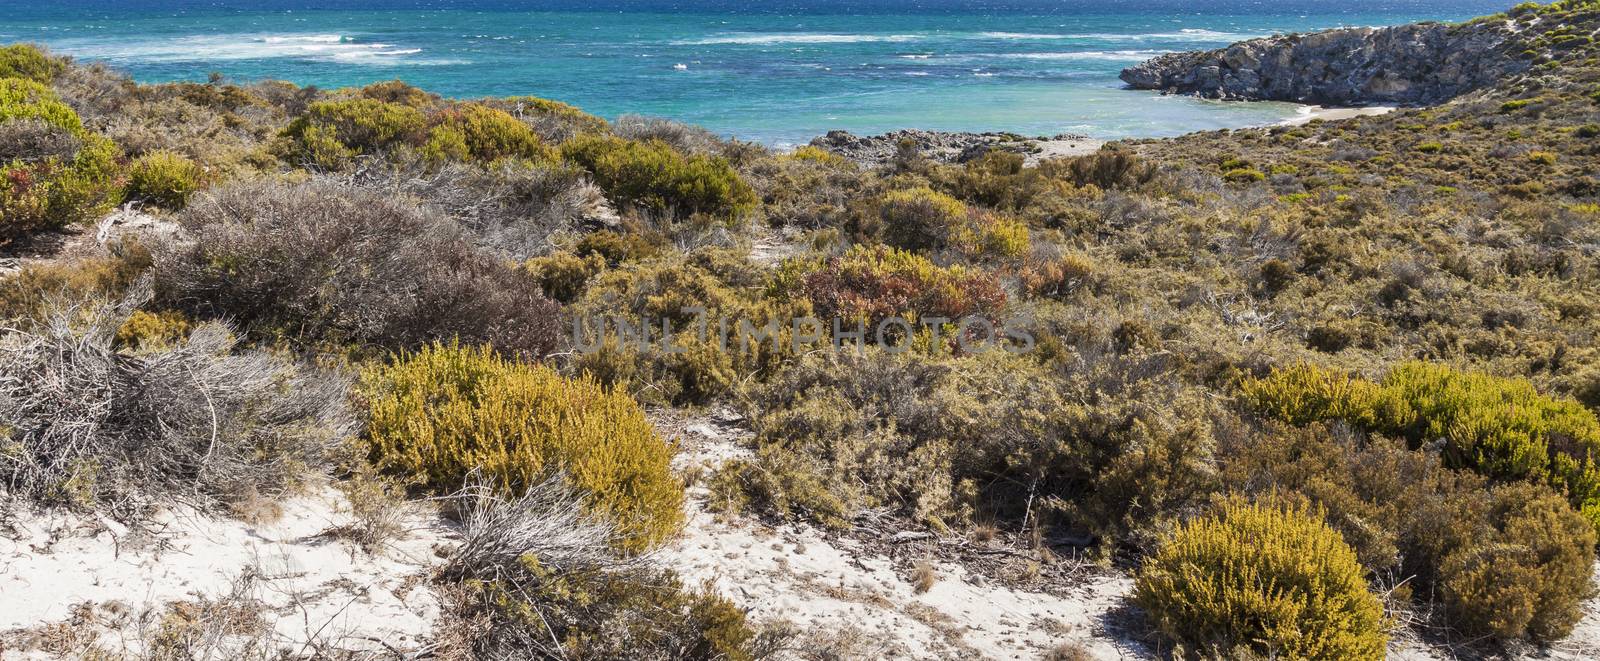 Scenic view over one of the beaches of Rottnest island, Australi by mariusz_prusaczyk